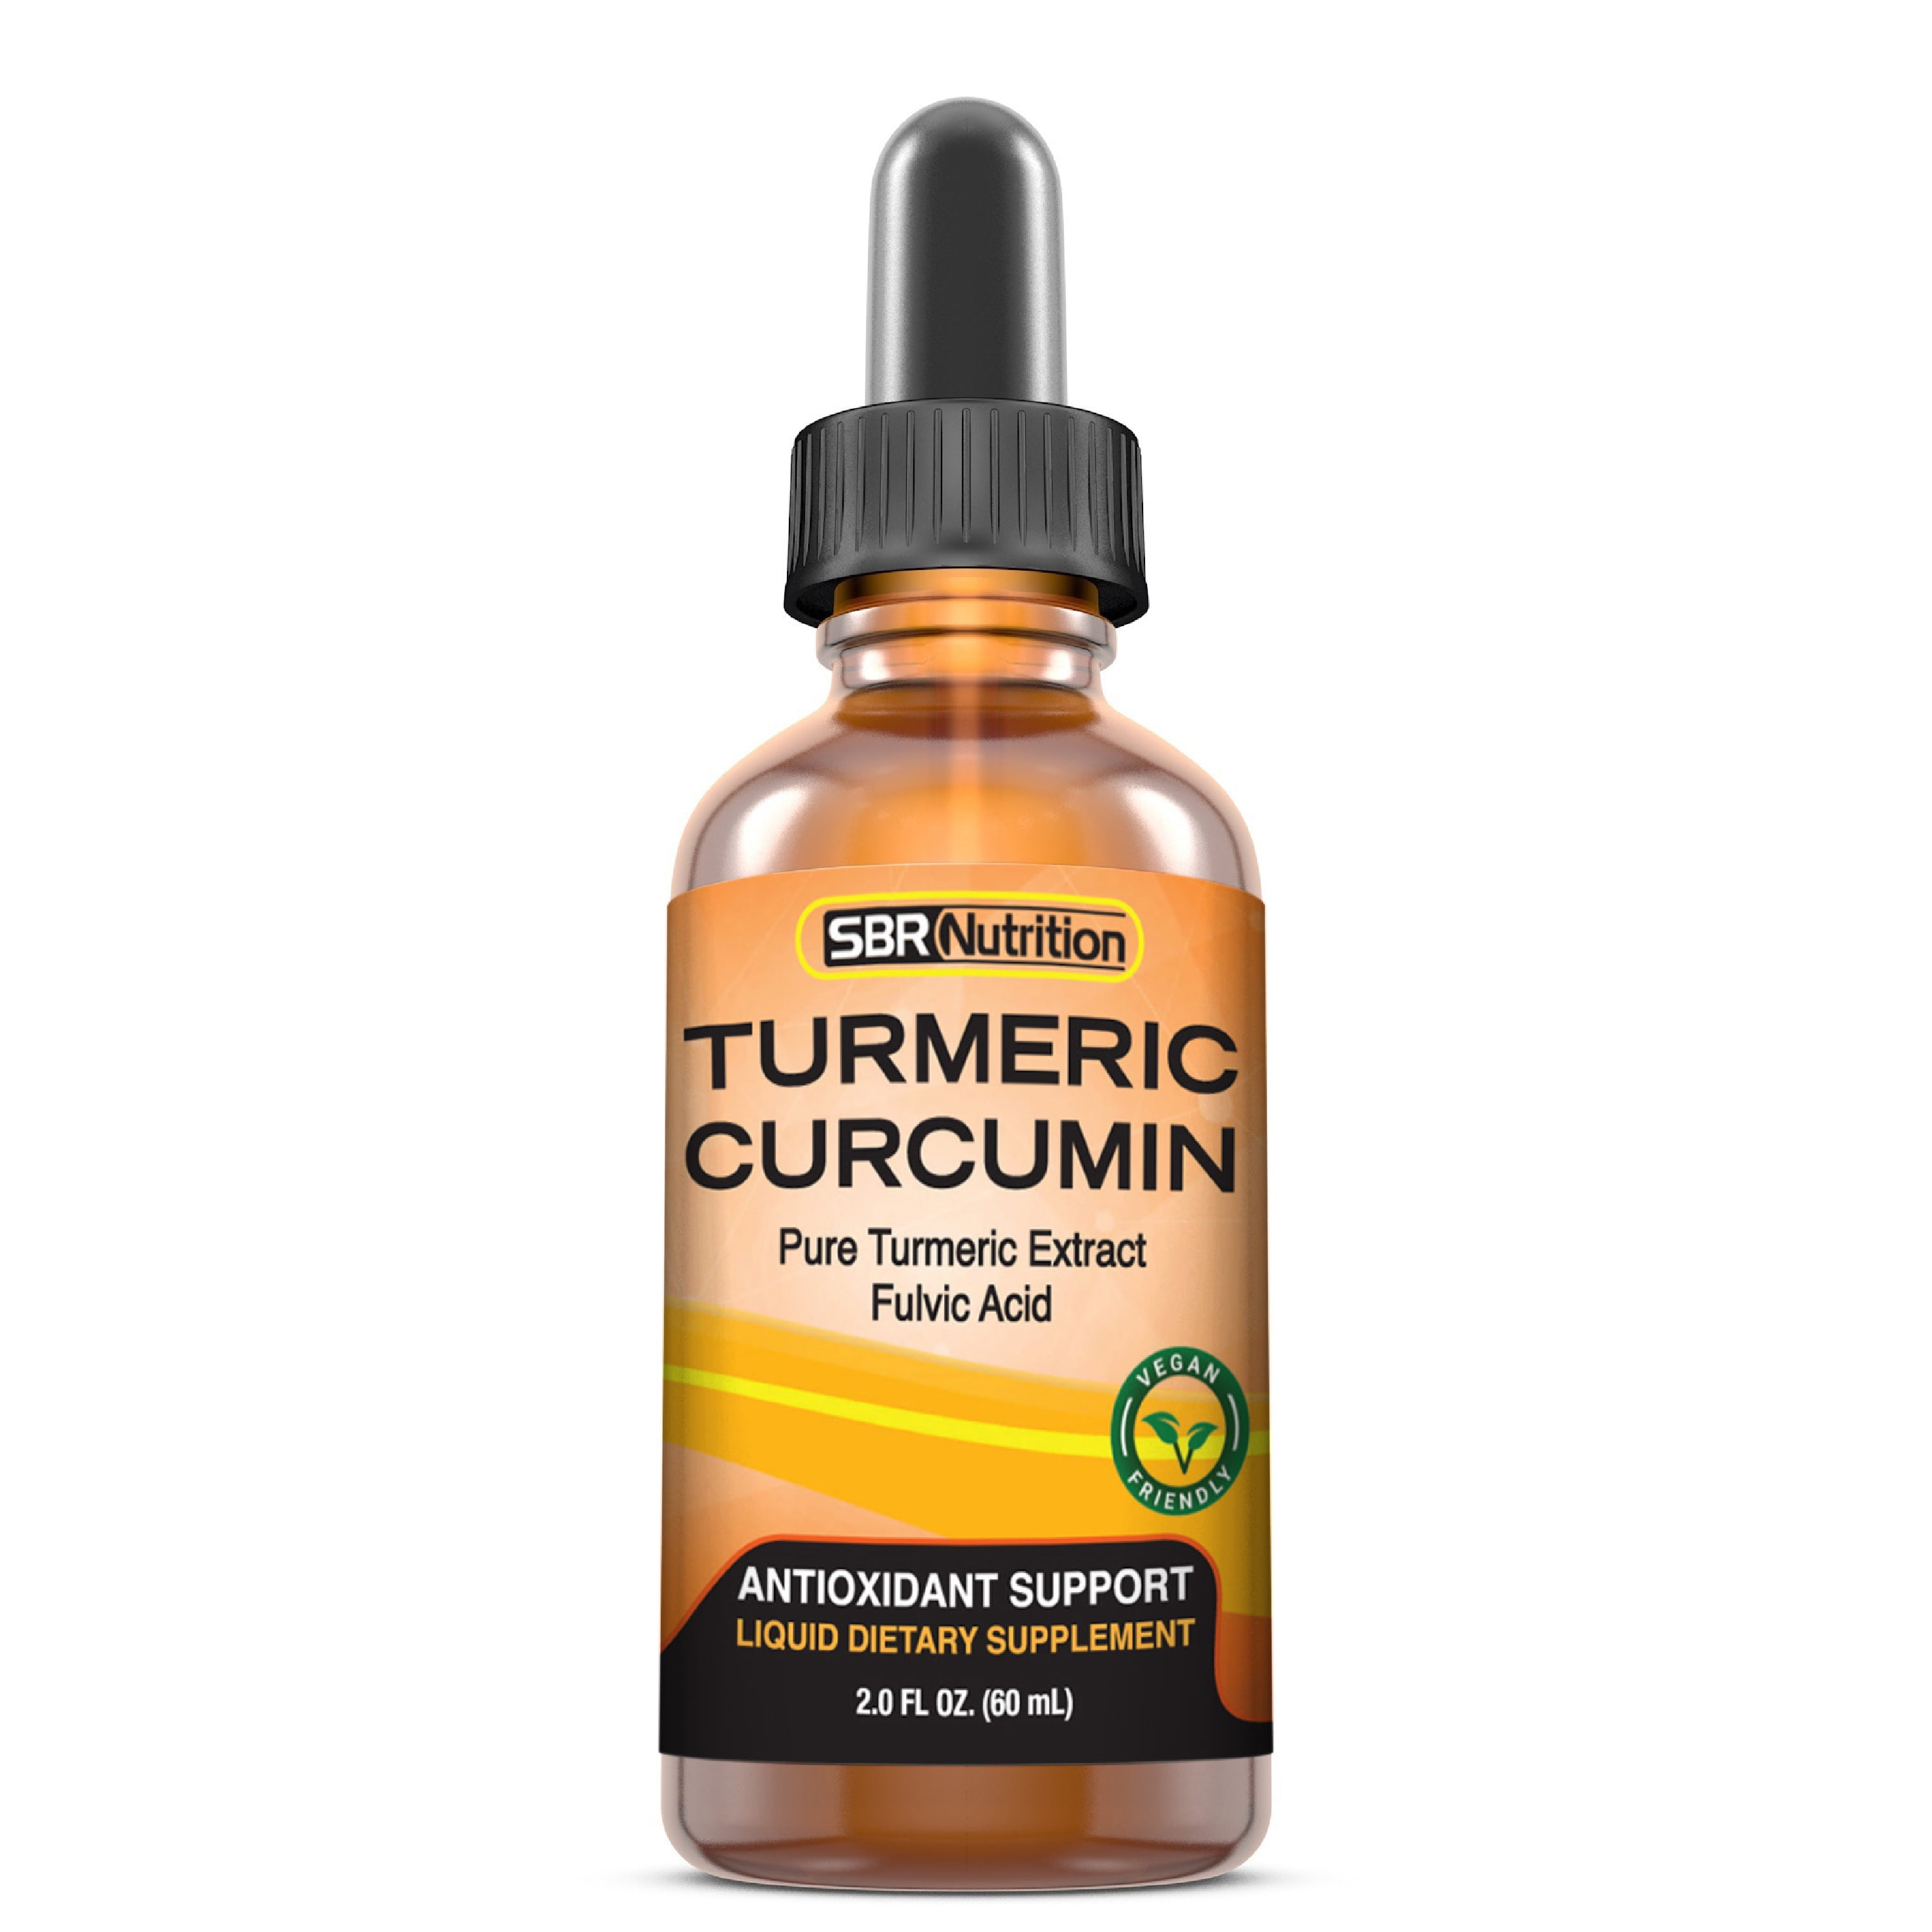 MAX ABSORPTION Liquid Turmeric Curcumin Drops | for Joint Pain, Digestion, Anti-Inflammation Support | Liposomal Organic Turmeric Root Extract | Vegan, Non-GMO, Made in USA …